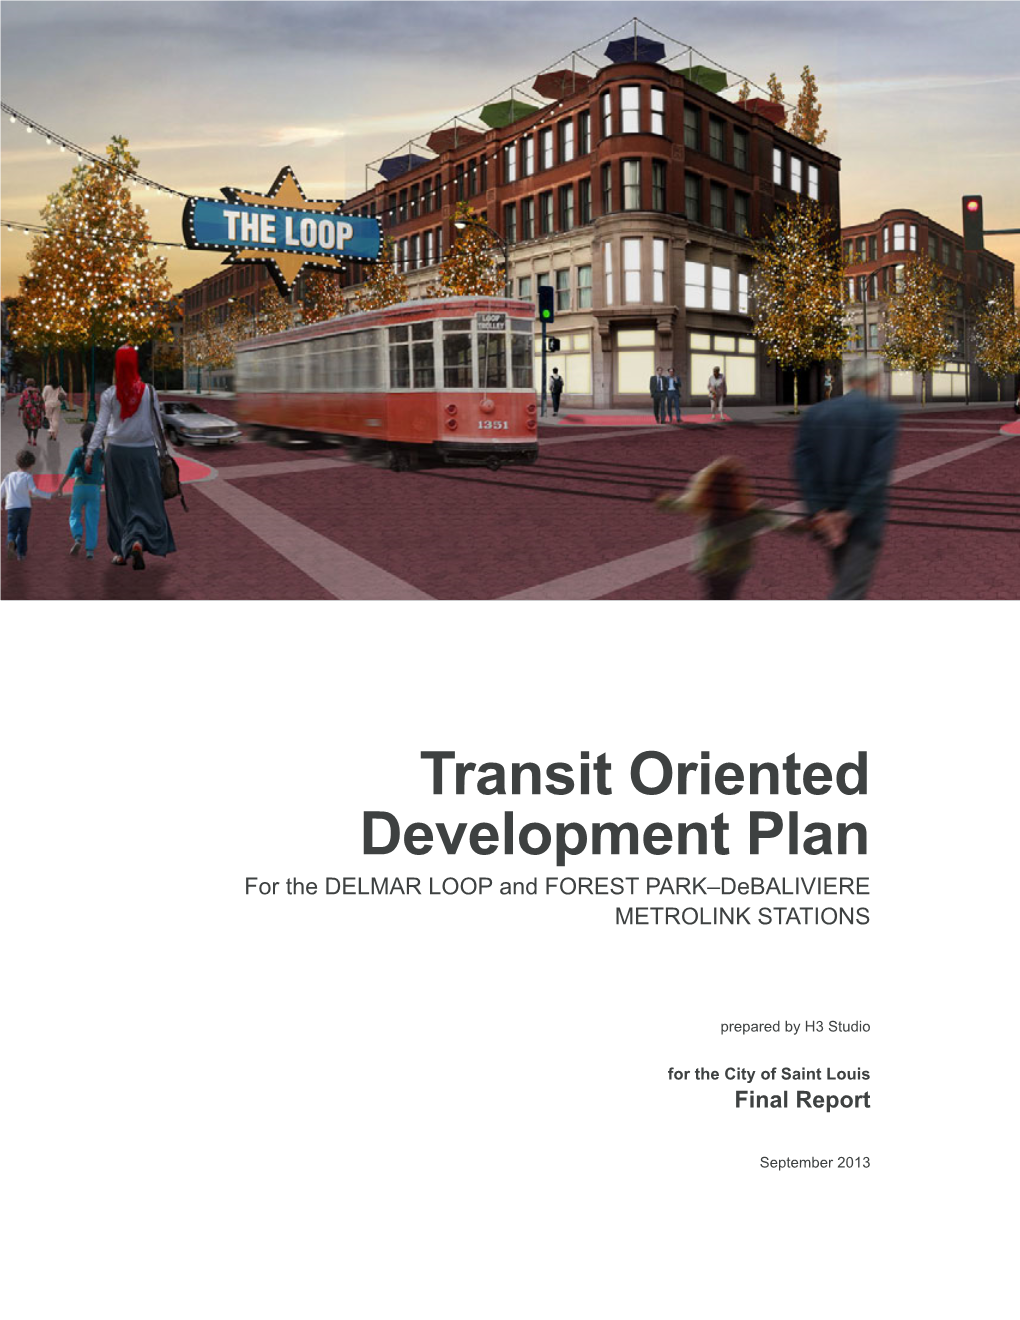 Transit Oriented Development Plan for the DELMAR LOOP and FOREST PARK–Debaliviere METROLINK STATIONS